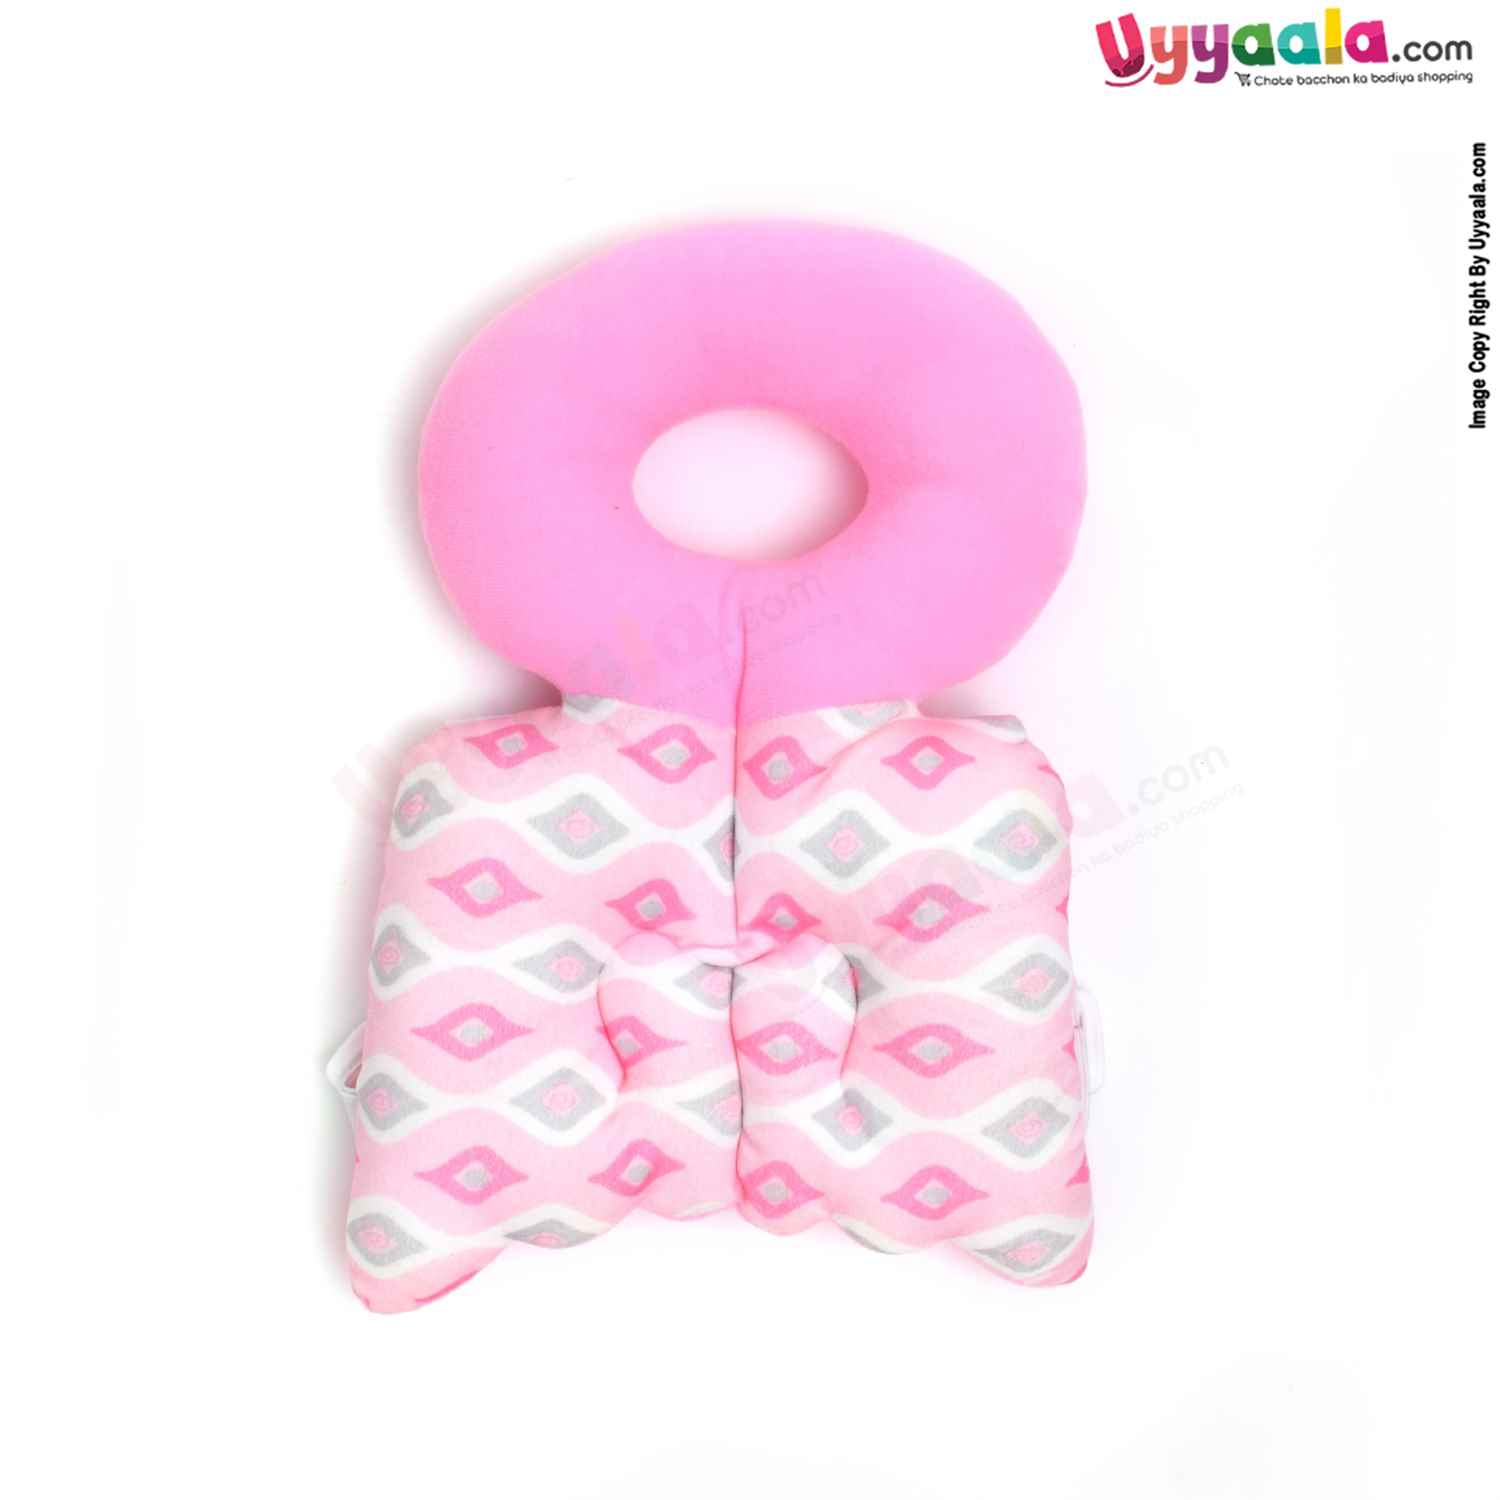 Baby Head Protector with Pillow with Adjustable Straps & Velvet Material